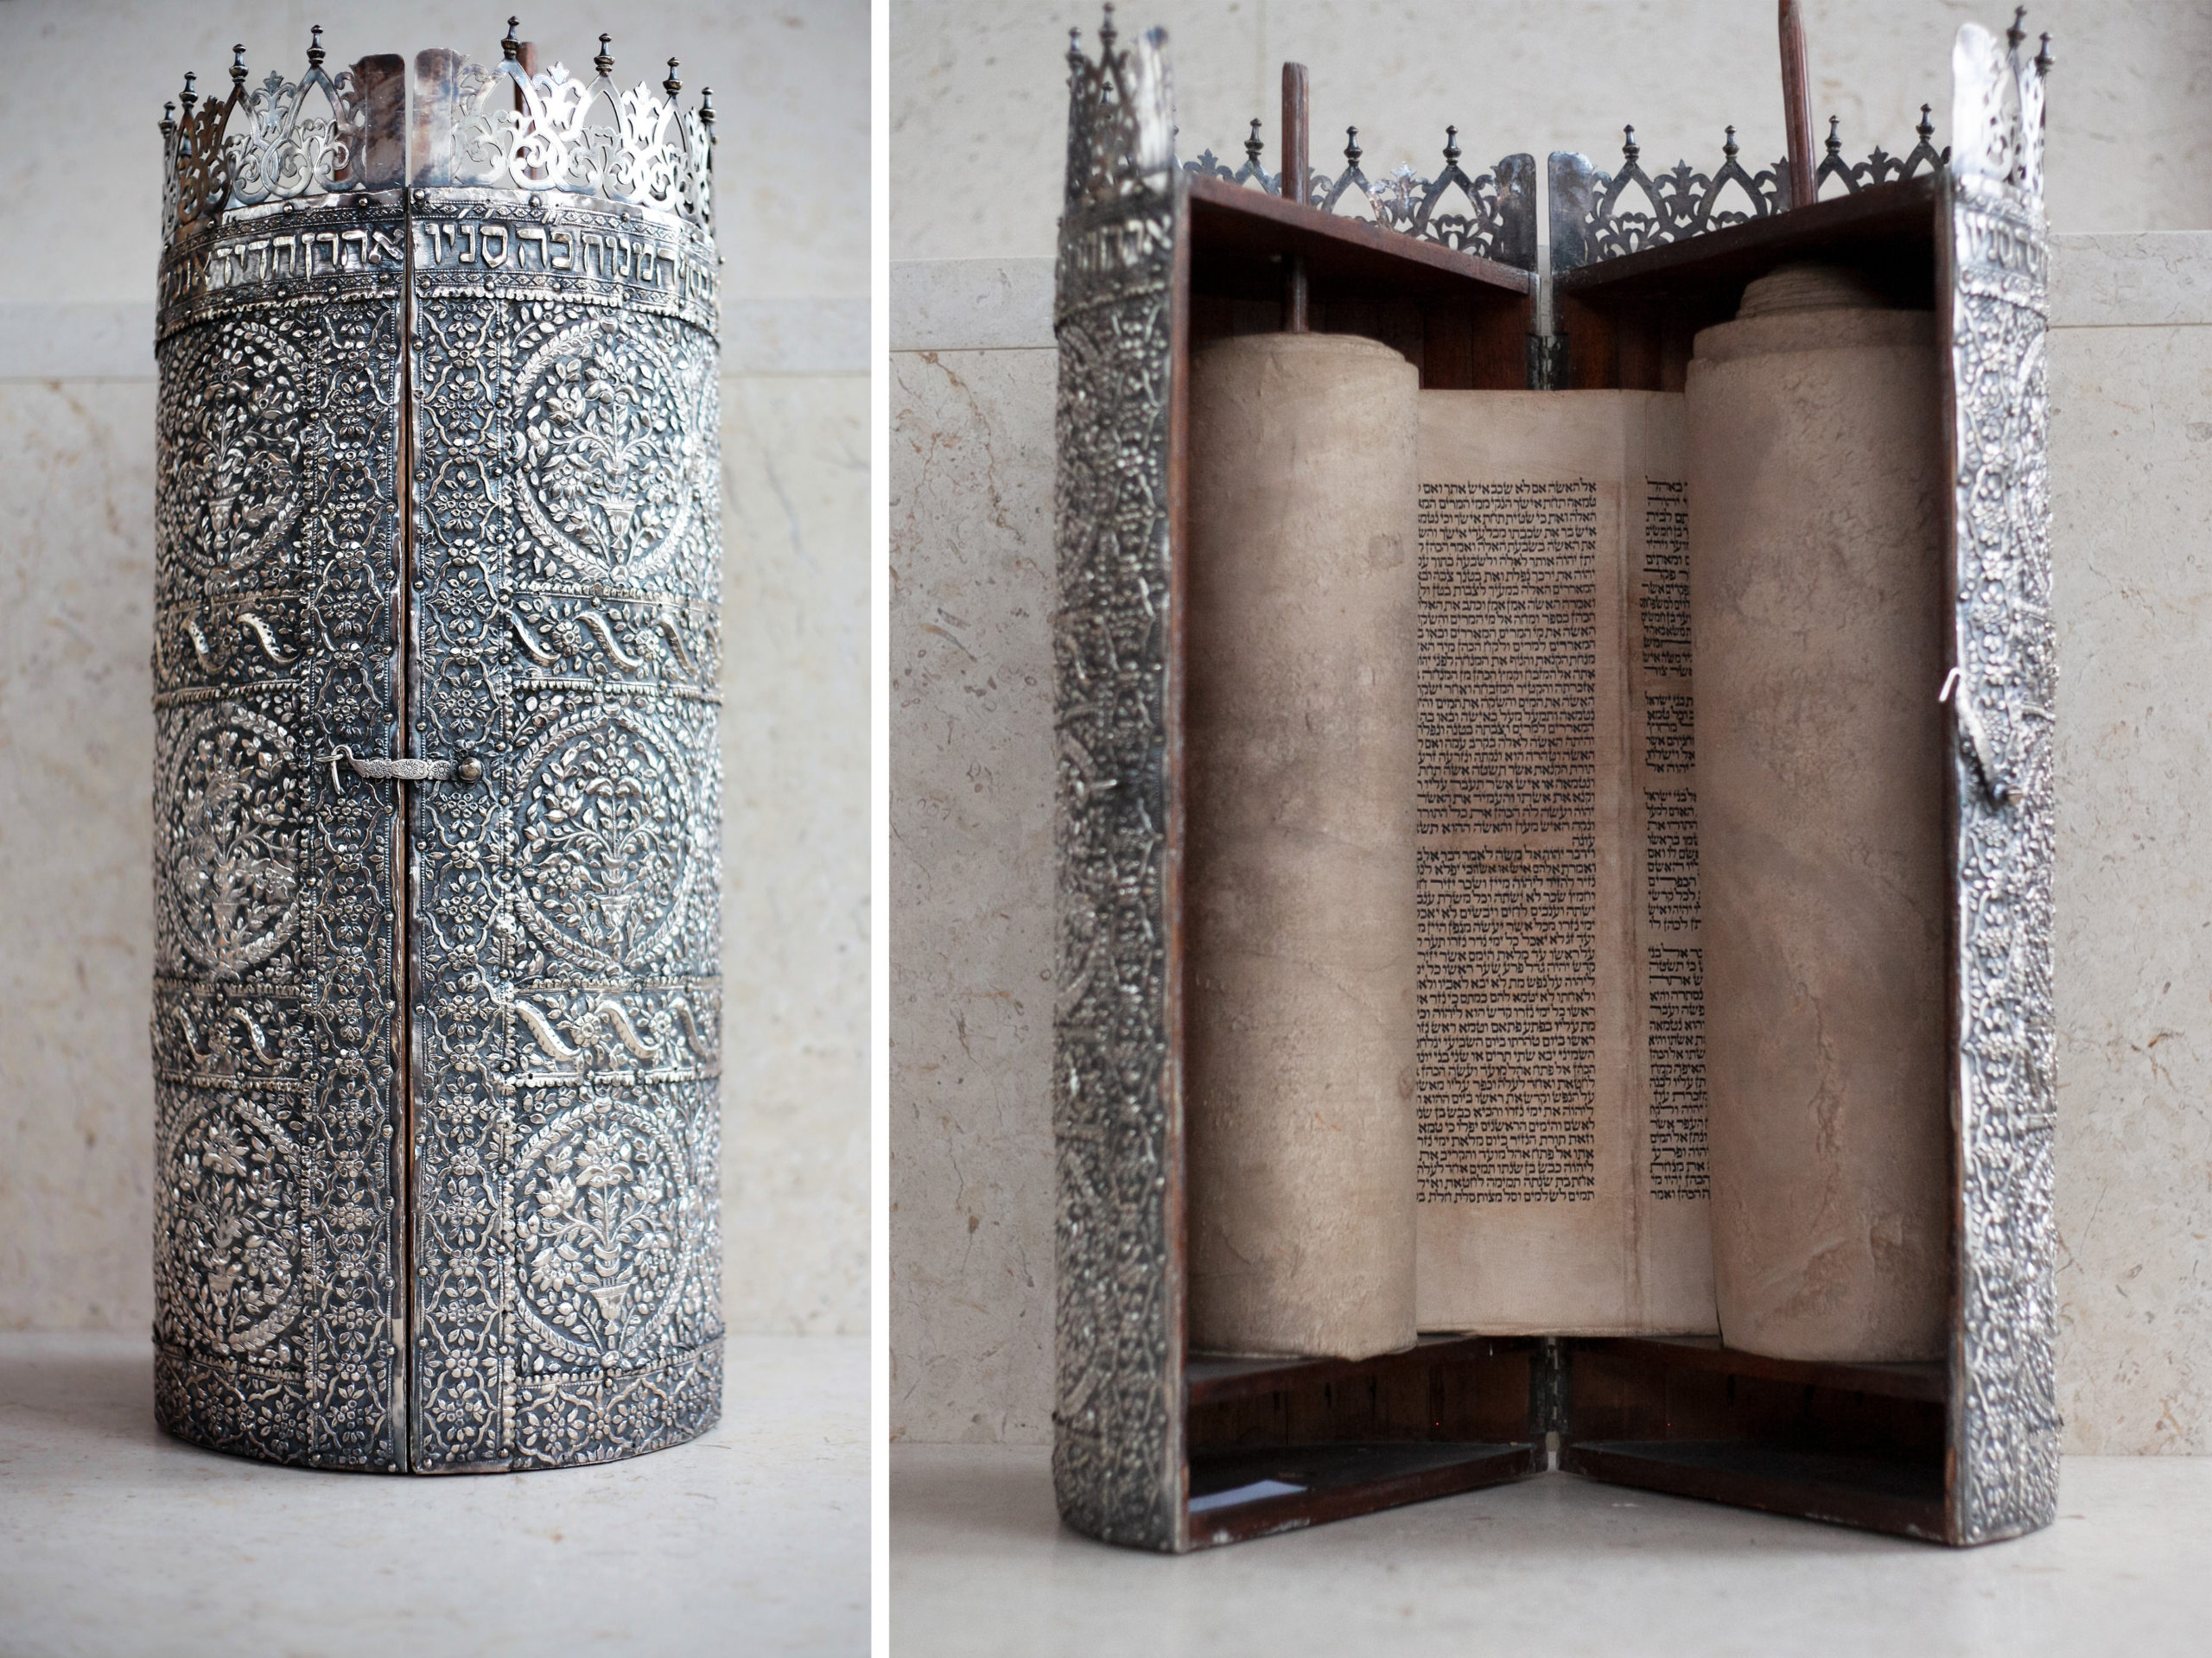 The Torah and its adornment